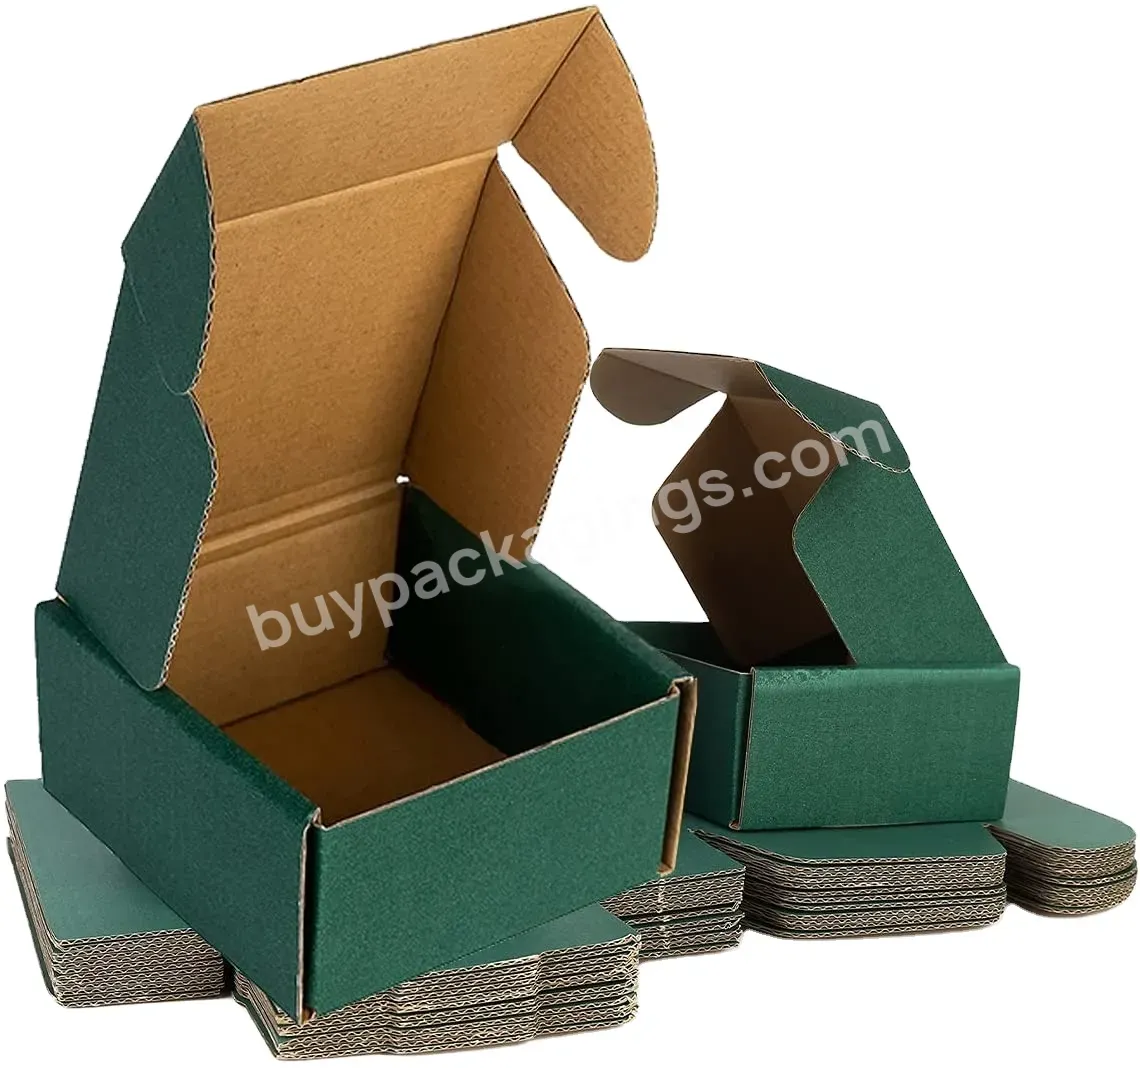 Recycled Small Corrugated Packaging Shipping Box Matte Black Corrugated Shipping Boxes Foldable Custom Shipping Boxes - Buy Foldable Custom Shipping Boxes,Matte Black Corrugated Shipping Boxes,Recycled Small Corrugated Packaging Shipping Box.